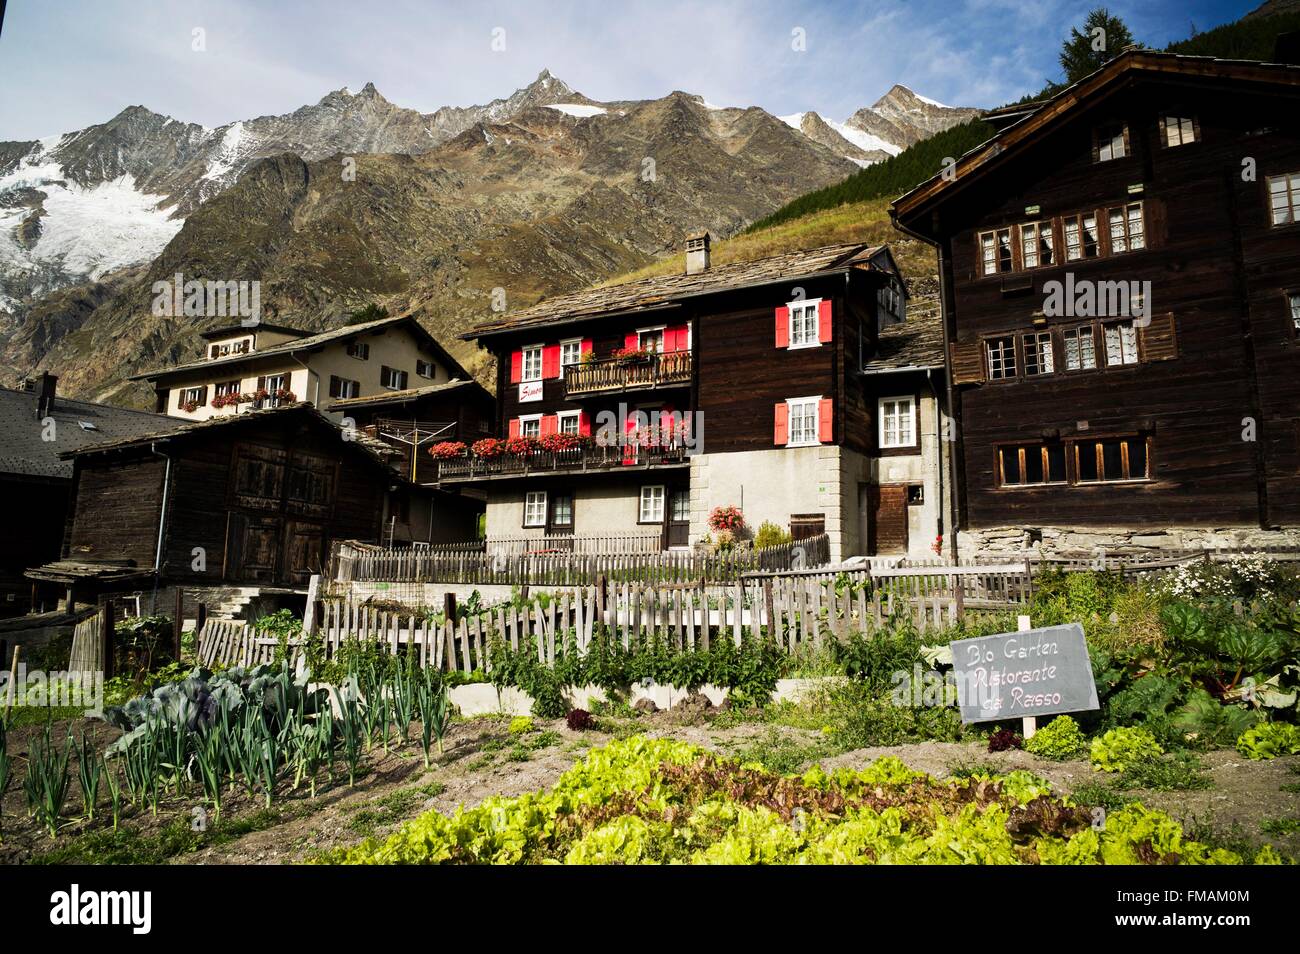 Switzerland, Canton of Valais, Saas Valley, Saas Fee, 1800 m, the historical heart of the village Stock Photo